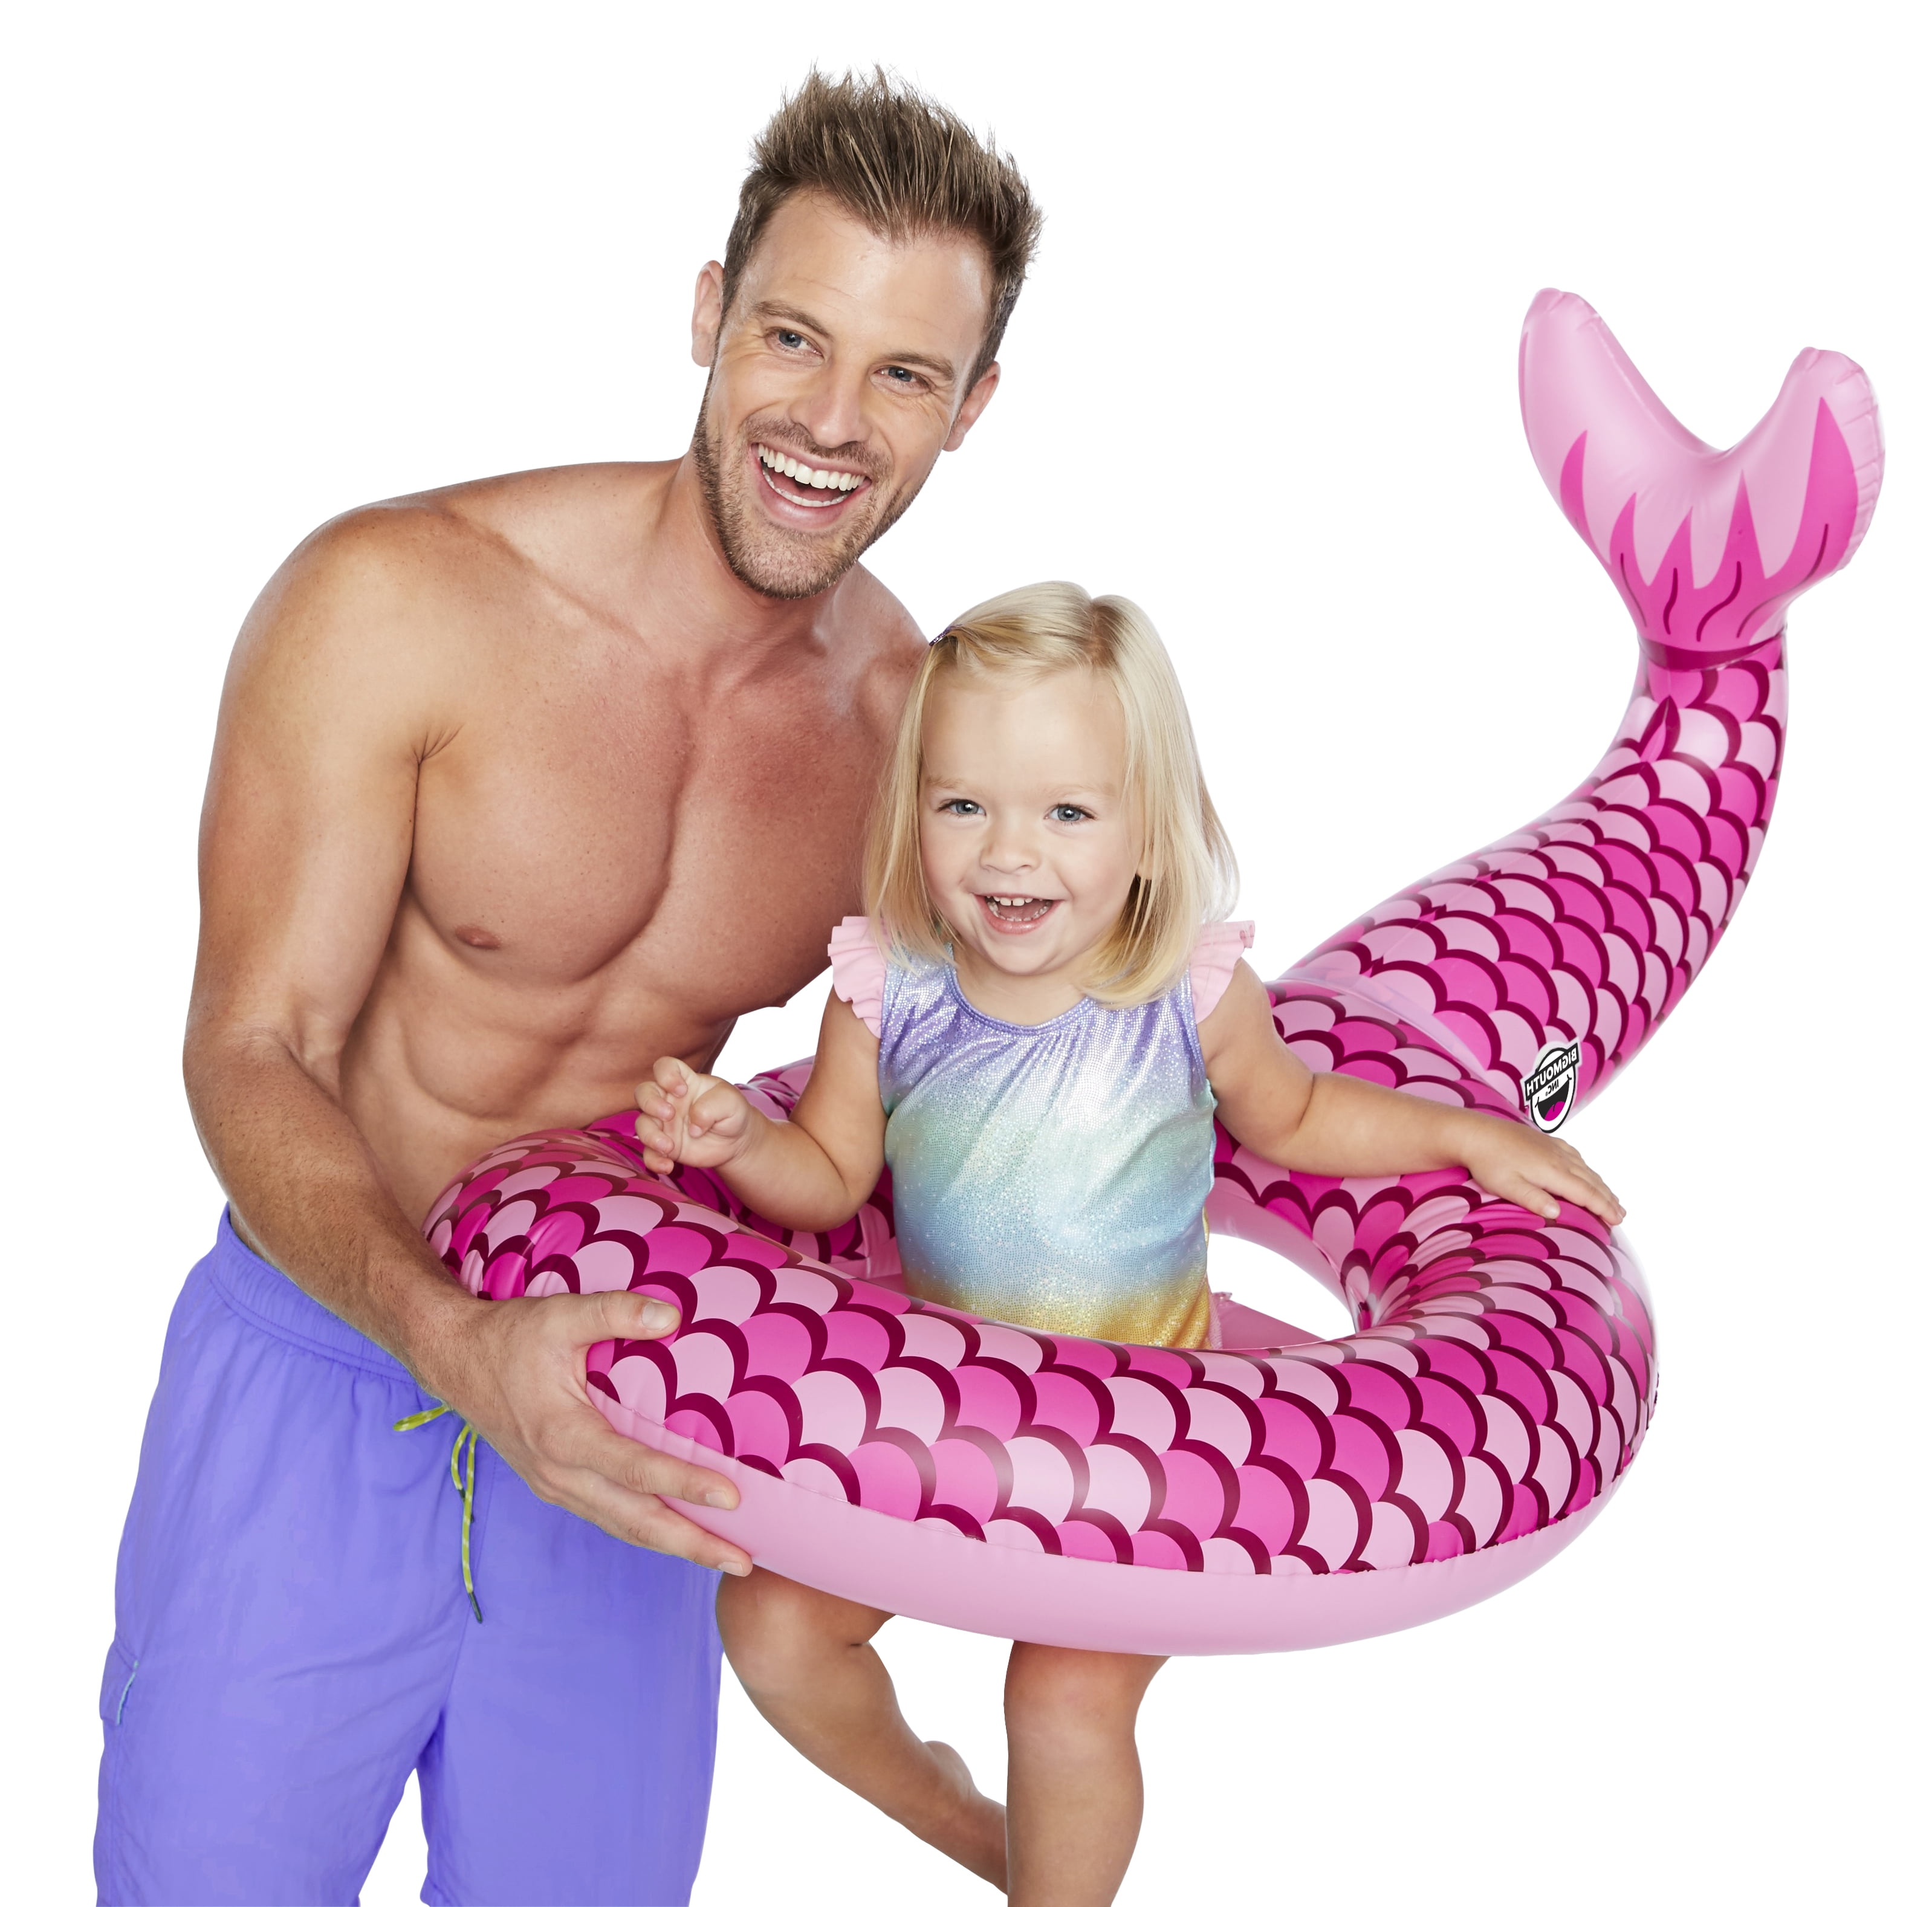 Details about   NEW Bigmouth Nibbles The Shark Lil’ Canopy Pool Float Raft Up To 40 Lbs 12-36 Mo